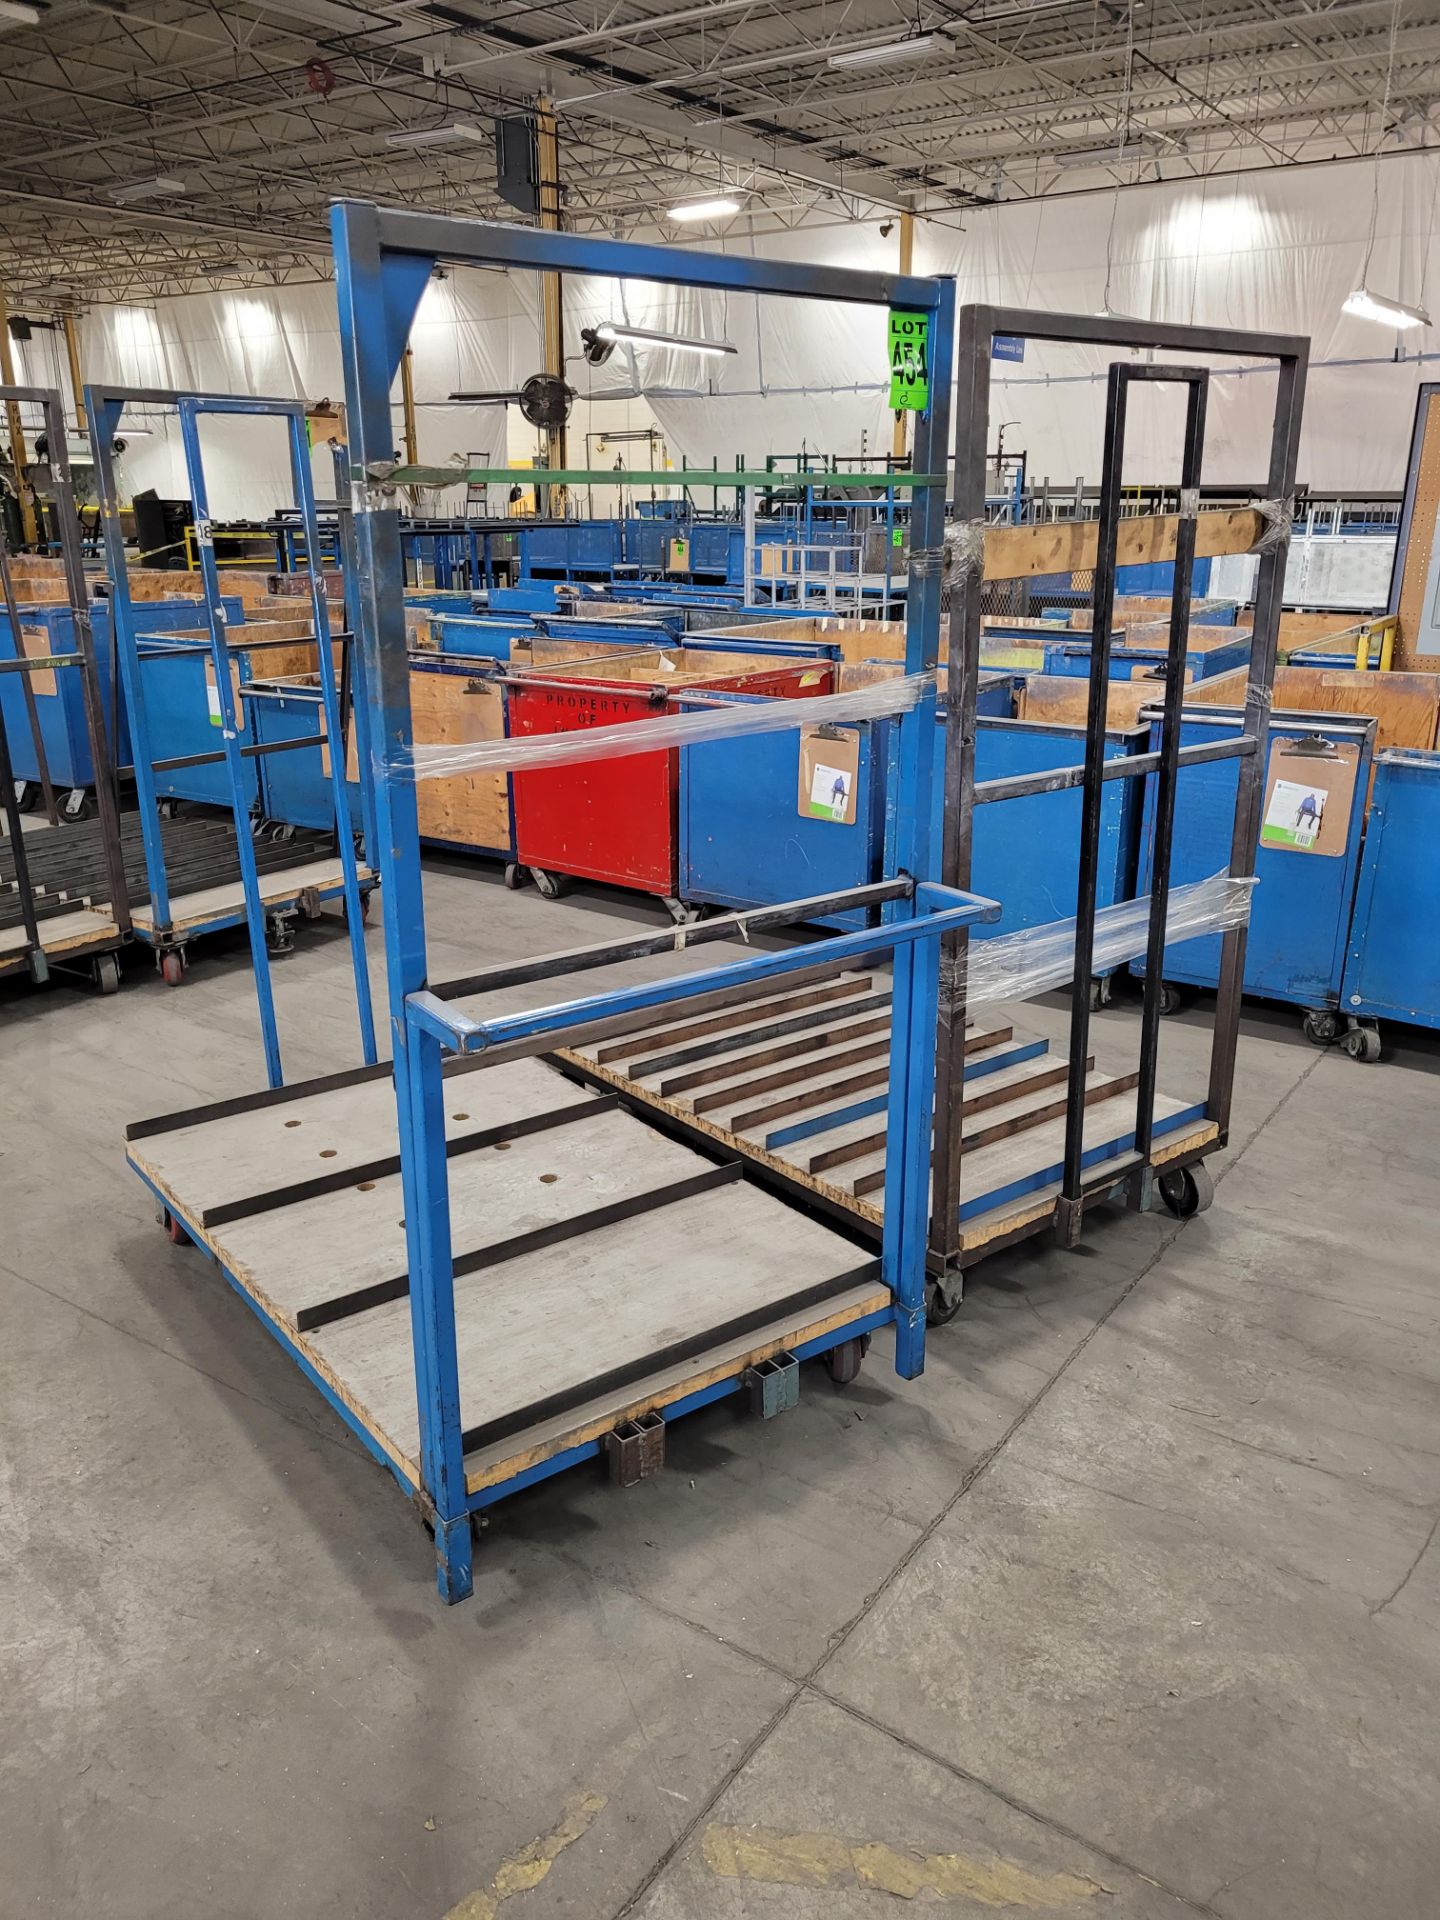 Lot of (2) steel carts, (1) w/ 9 steel dividers, (1) w/3 steel dividers, casters, removable steel si